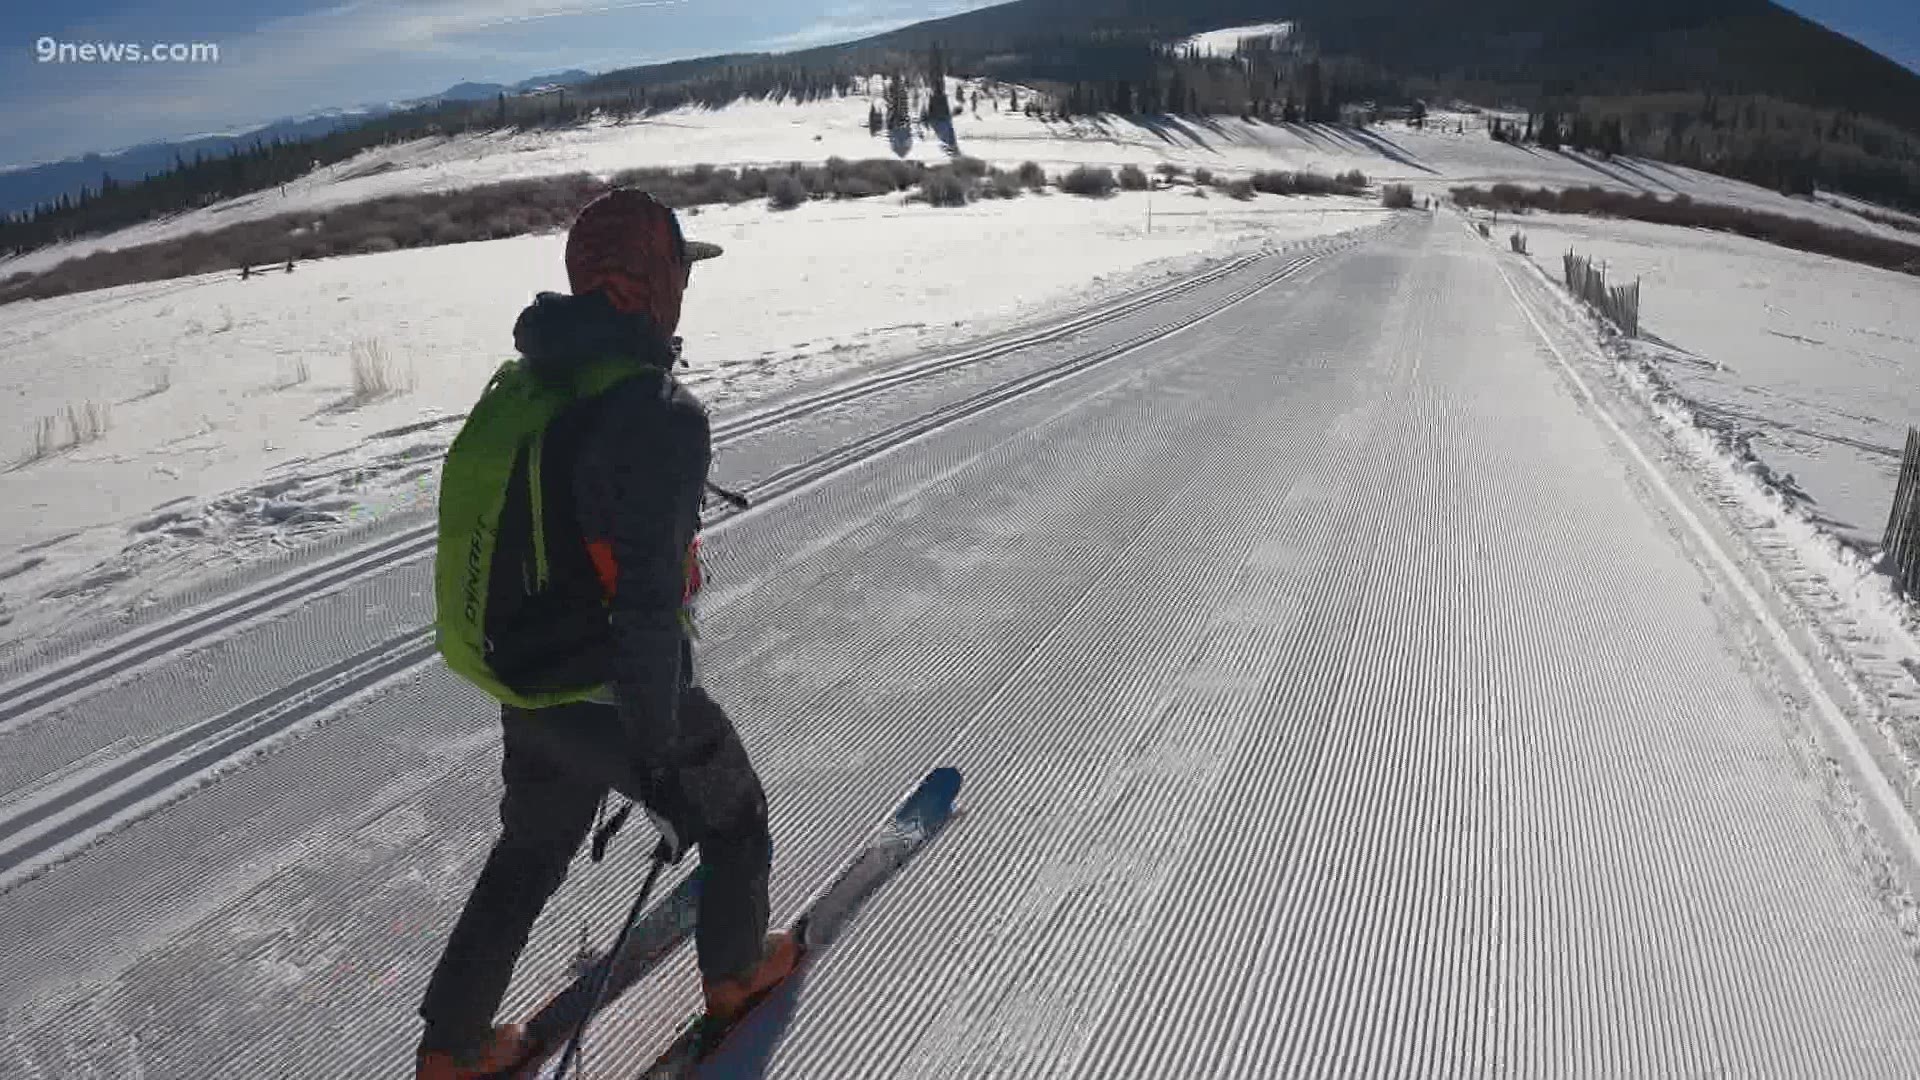 The Snow Mountain Ranch Nordic Center near Granby is offering backcountry avalanche safety classes after seeing more first-time backcountry skiers this season.